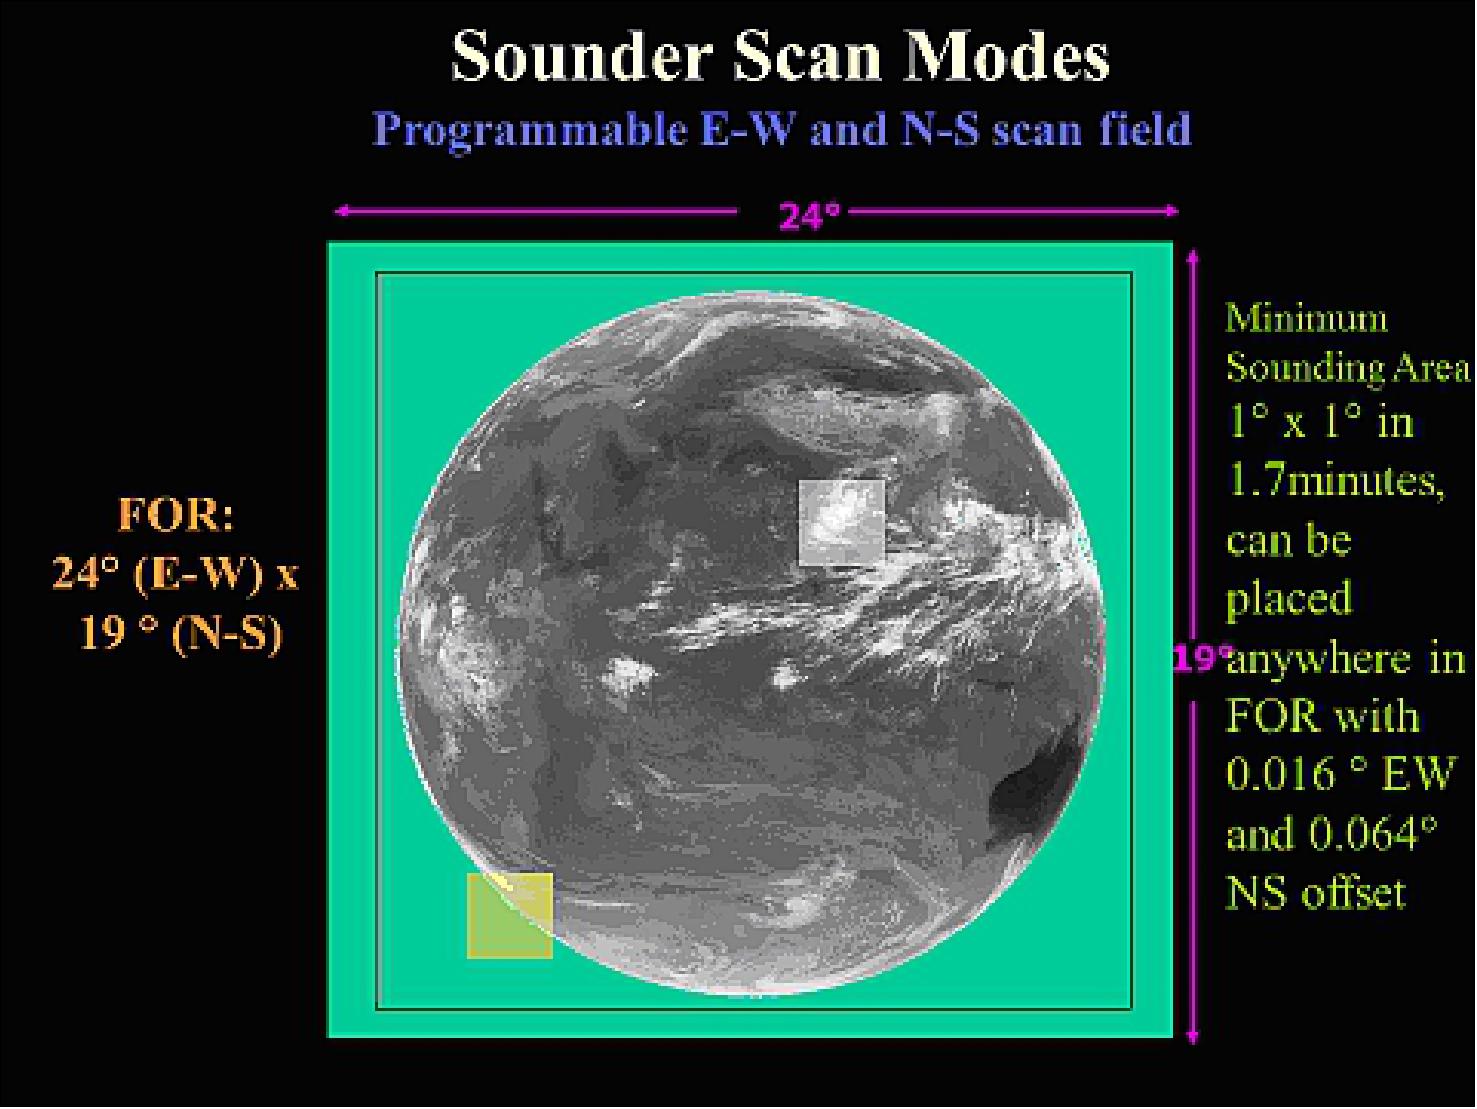 Figure 14: Scan modes of the Sounder (image credit: ISRO)